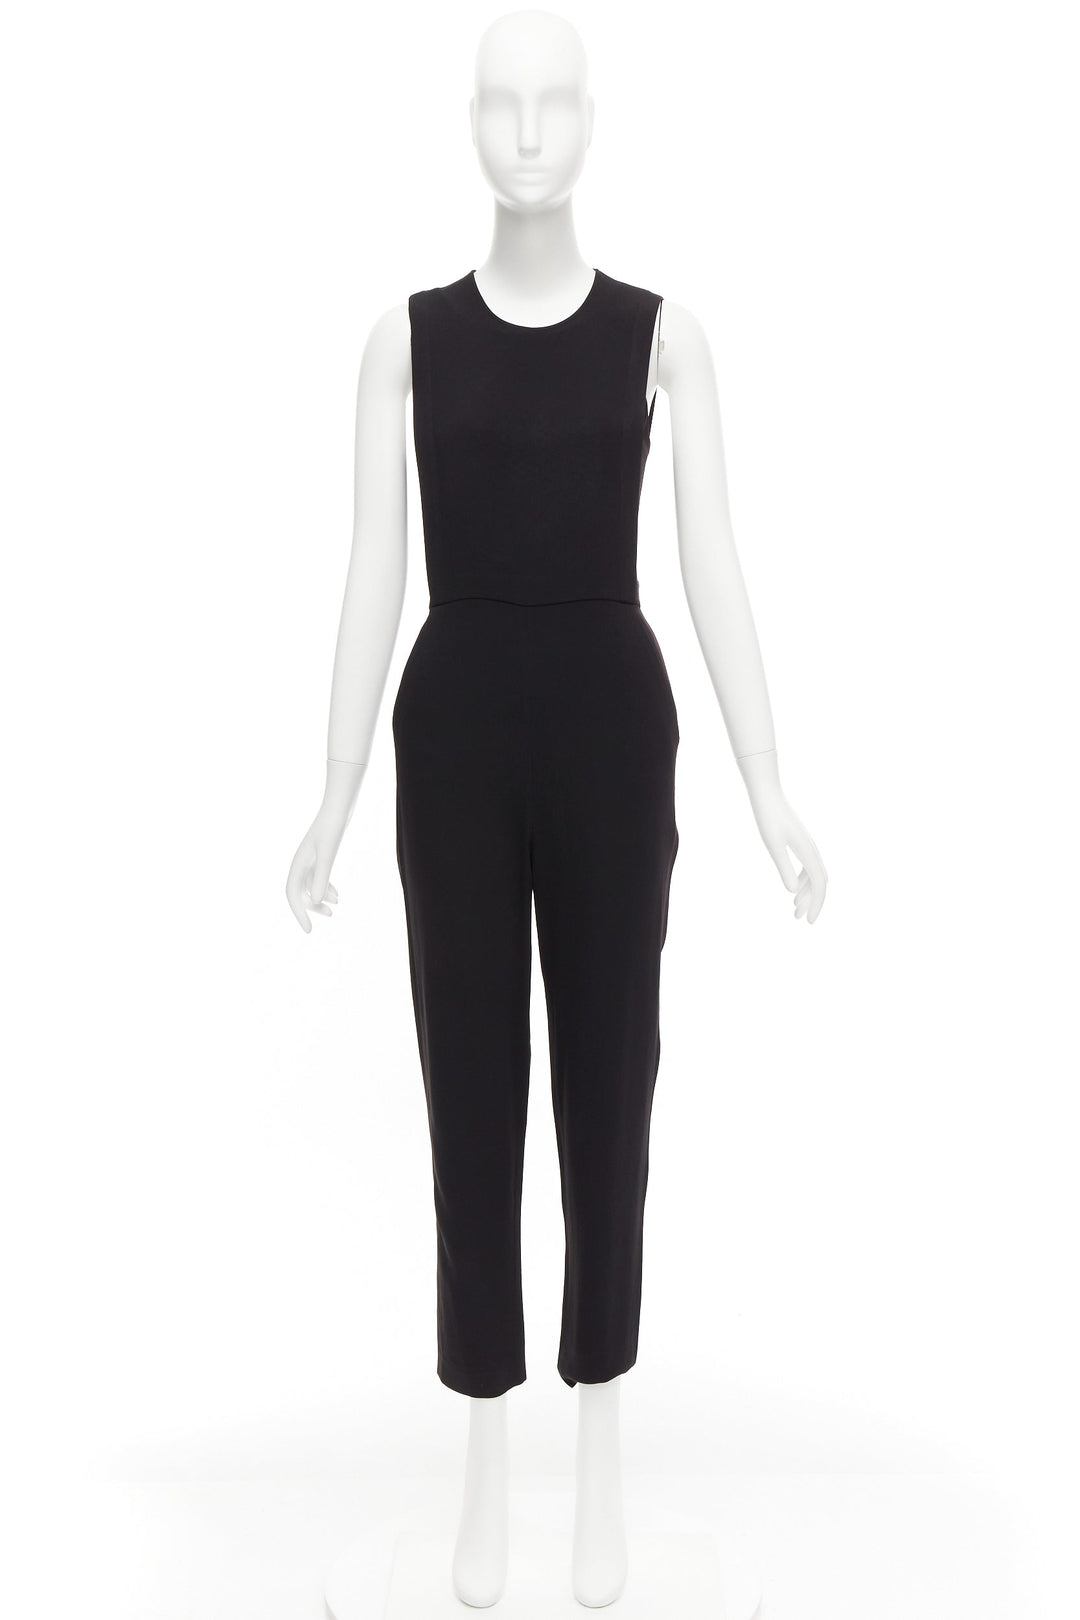 THEORY black layered top back zip cropped sleeveless jumpsuit US0 XS